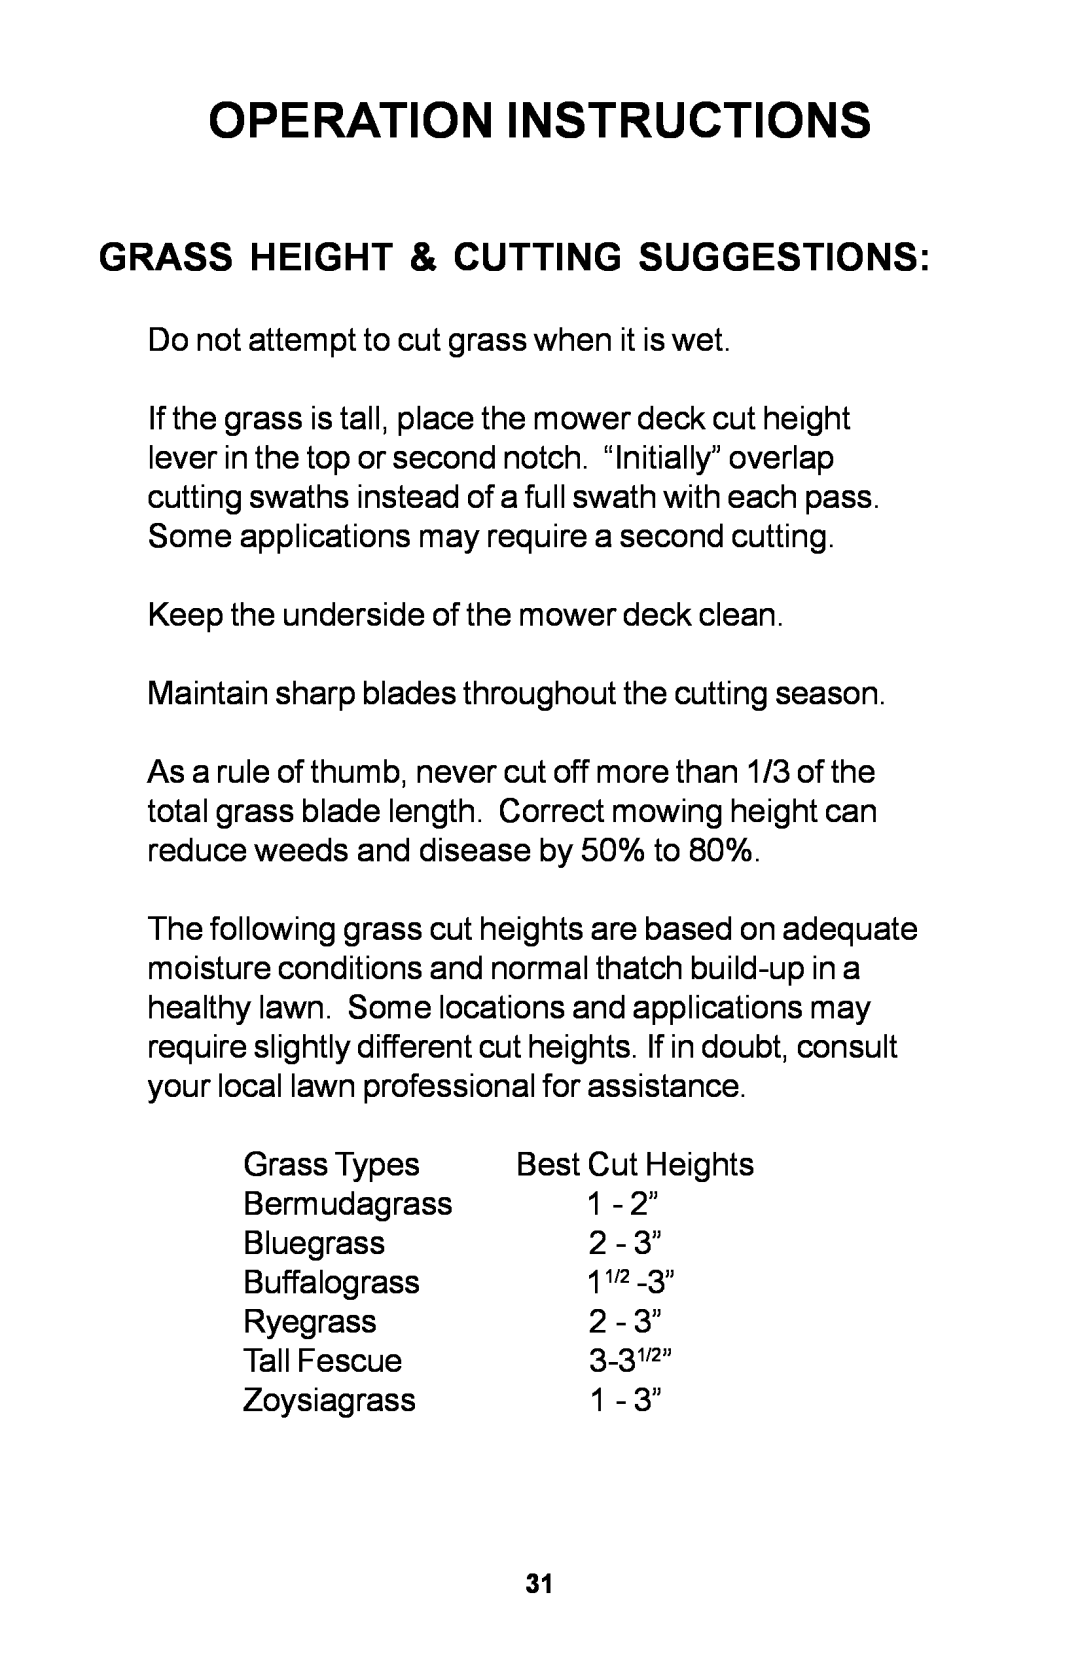 Dixon 30 manual Grass Height & Cutting Suggestions, Operation Instructions 